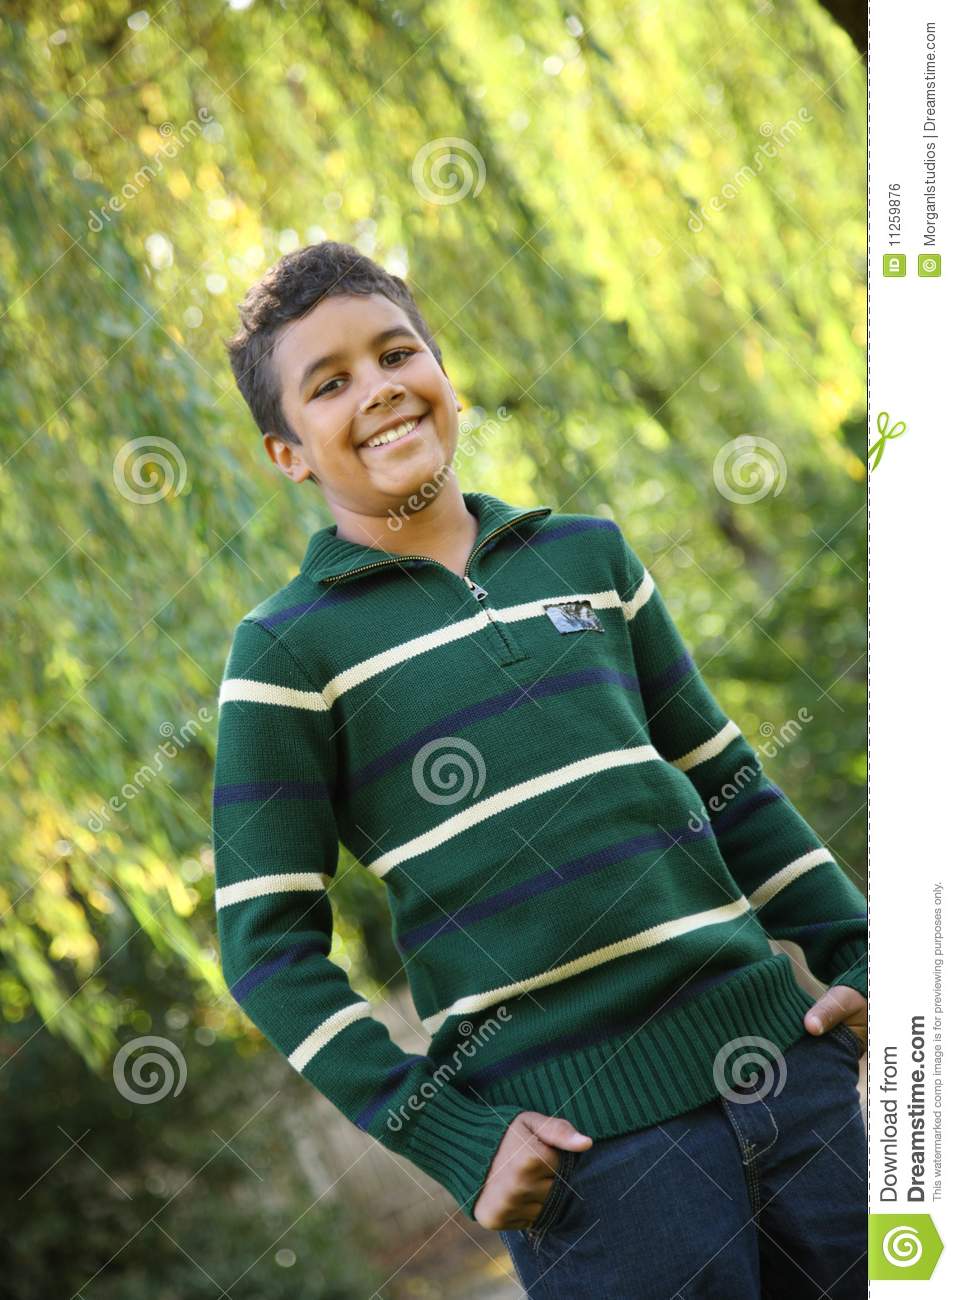 Portrait Of 11 Year Old Boy Royalty Free Stock Image   Image  11259876